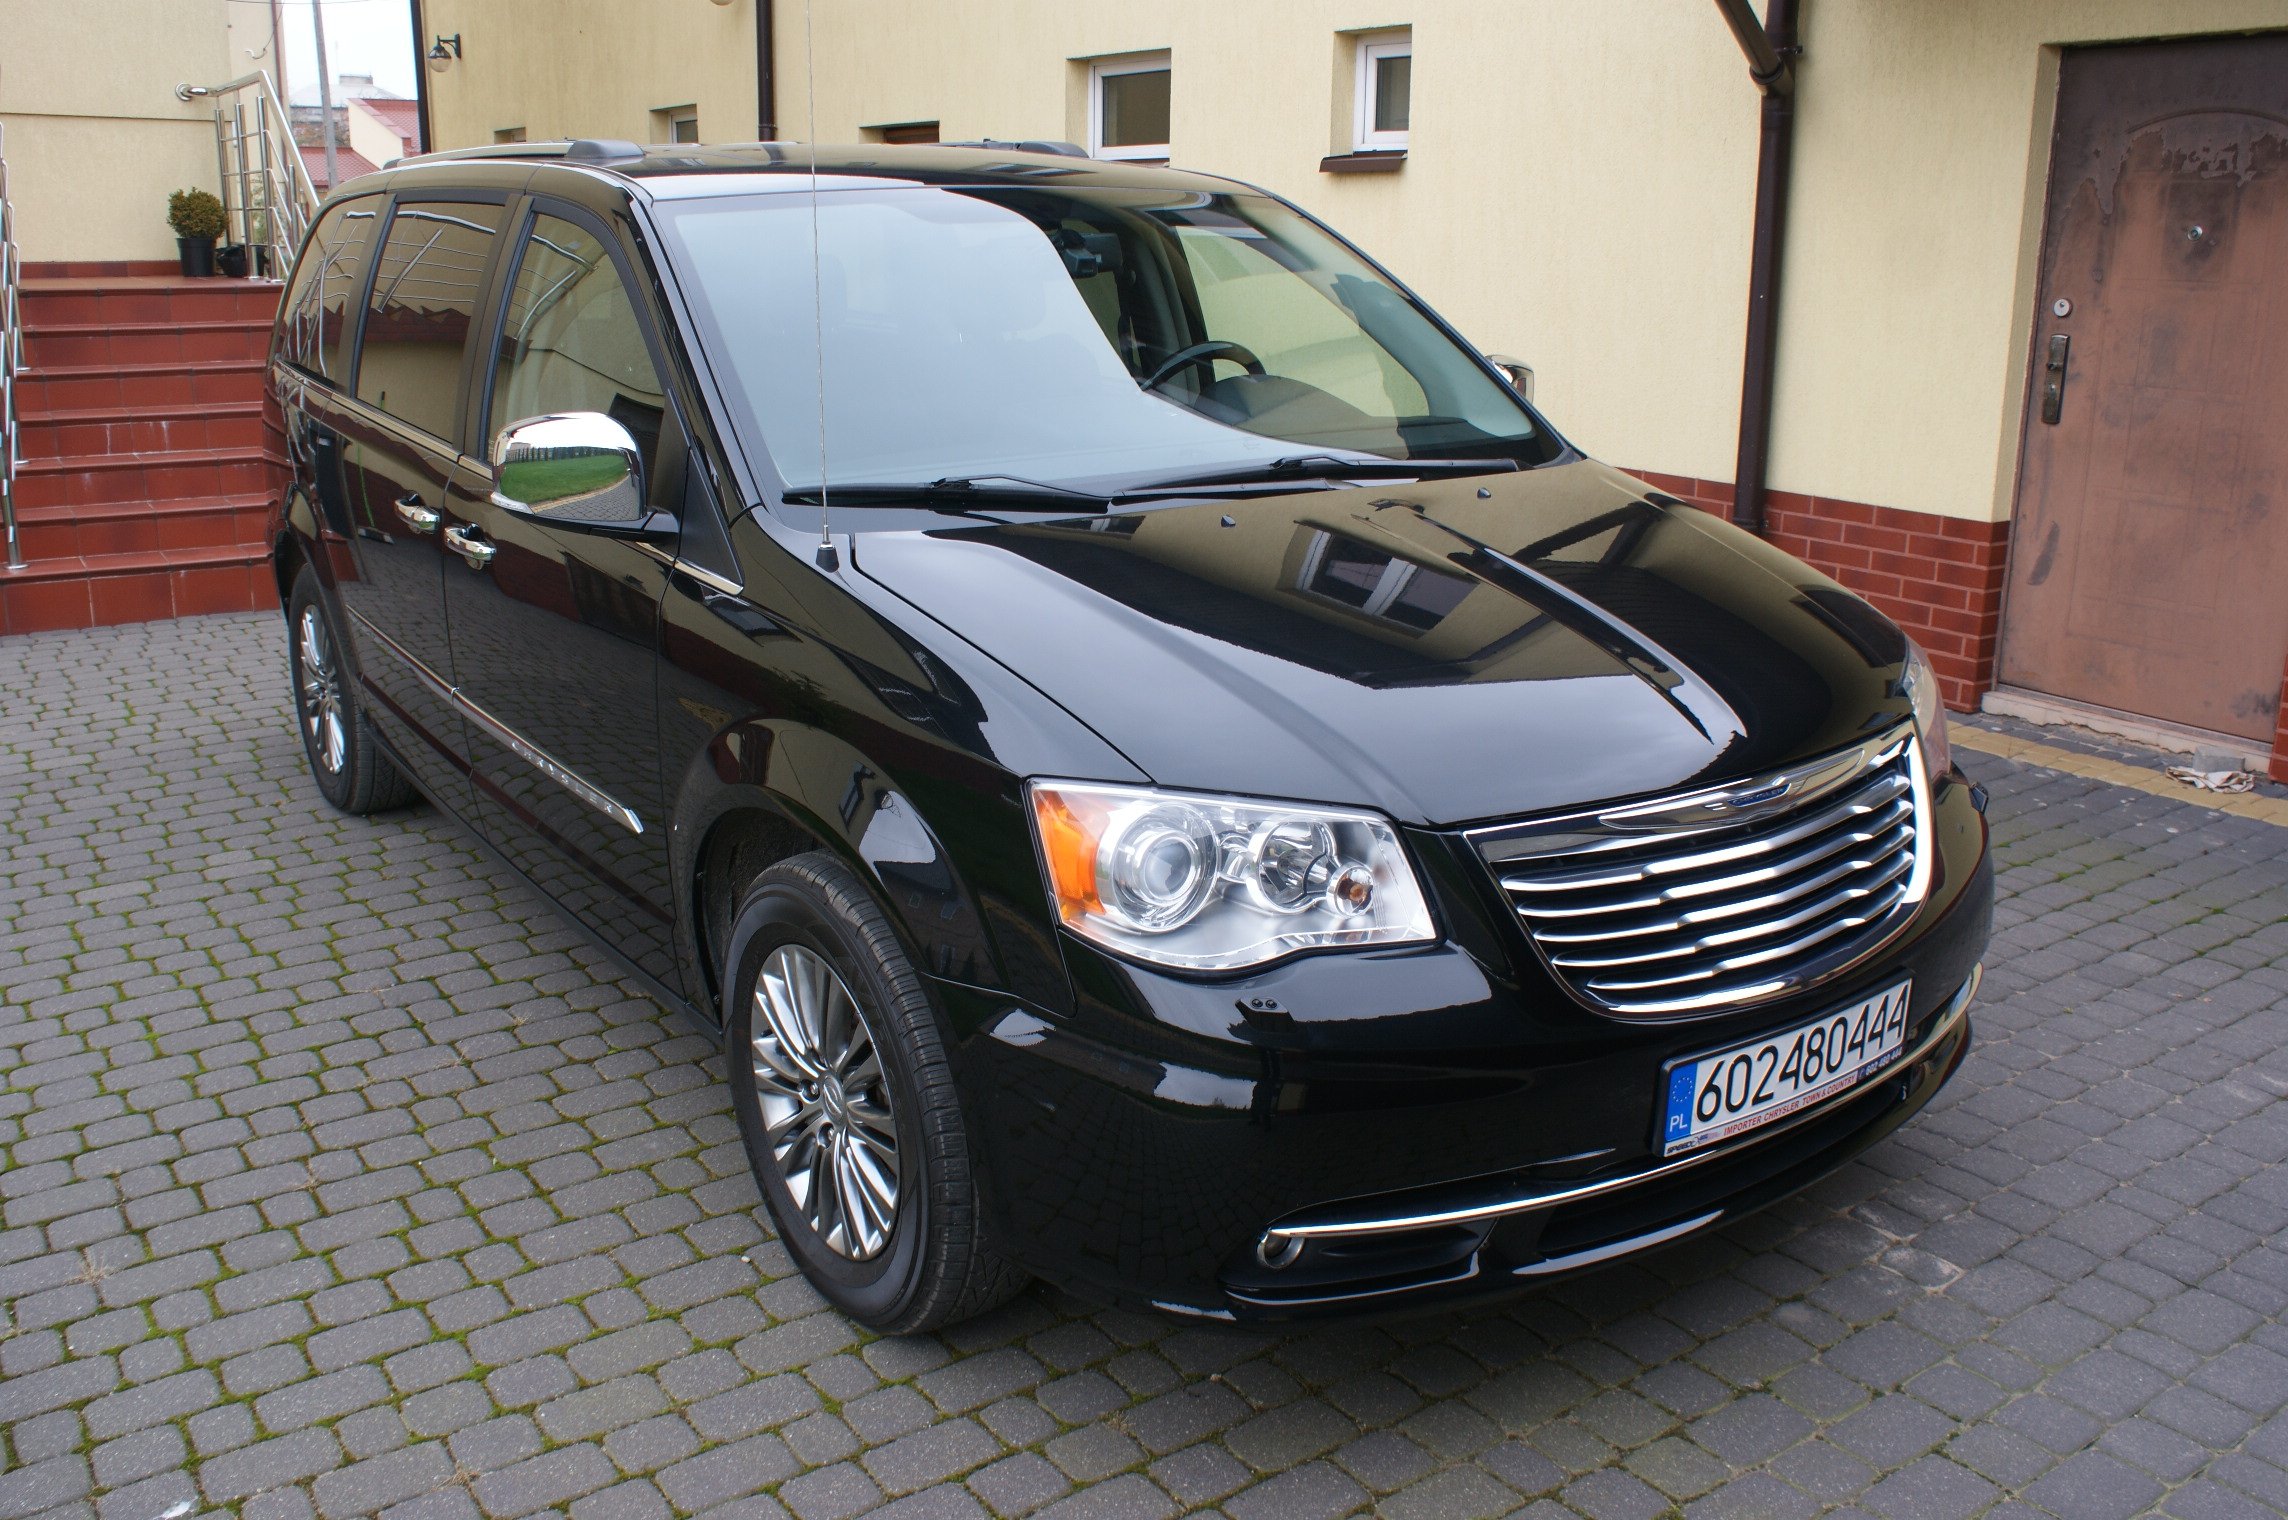 CHRYSLER TOWN COUNTRY 2014 LIMITED FAKTURA VAT23